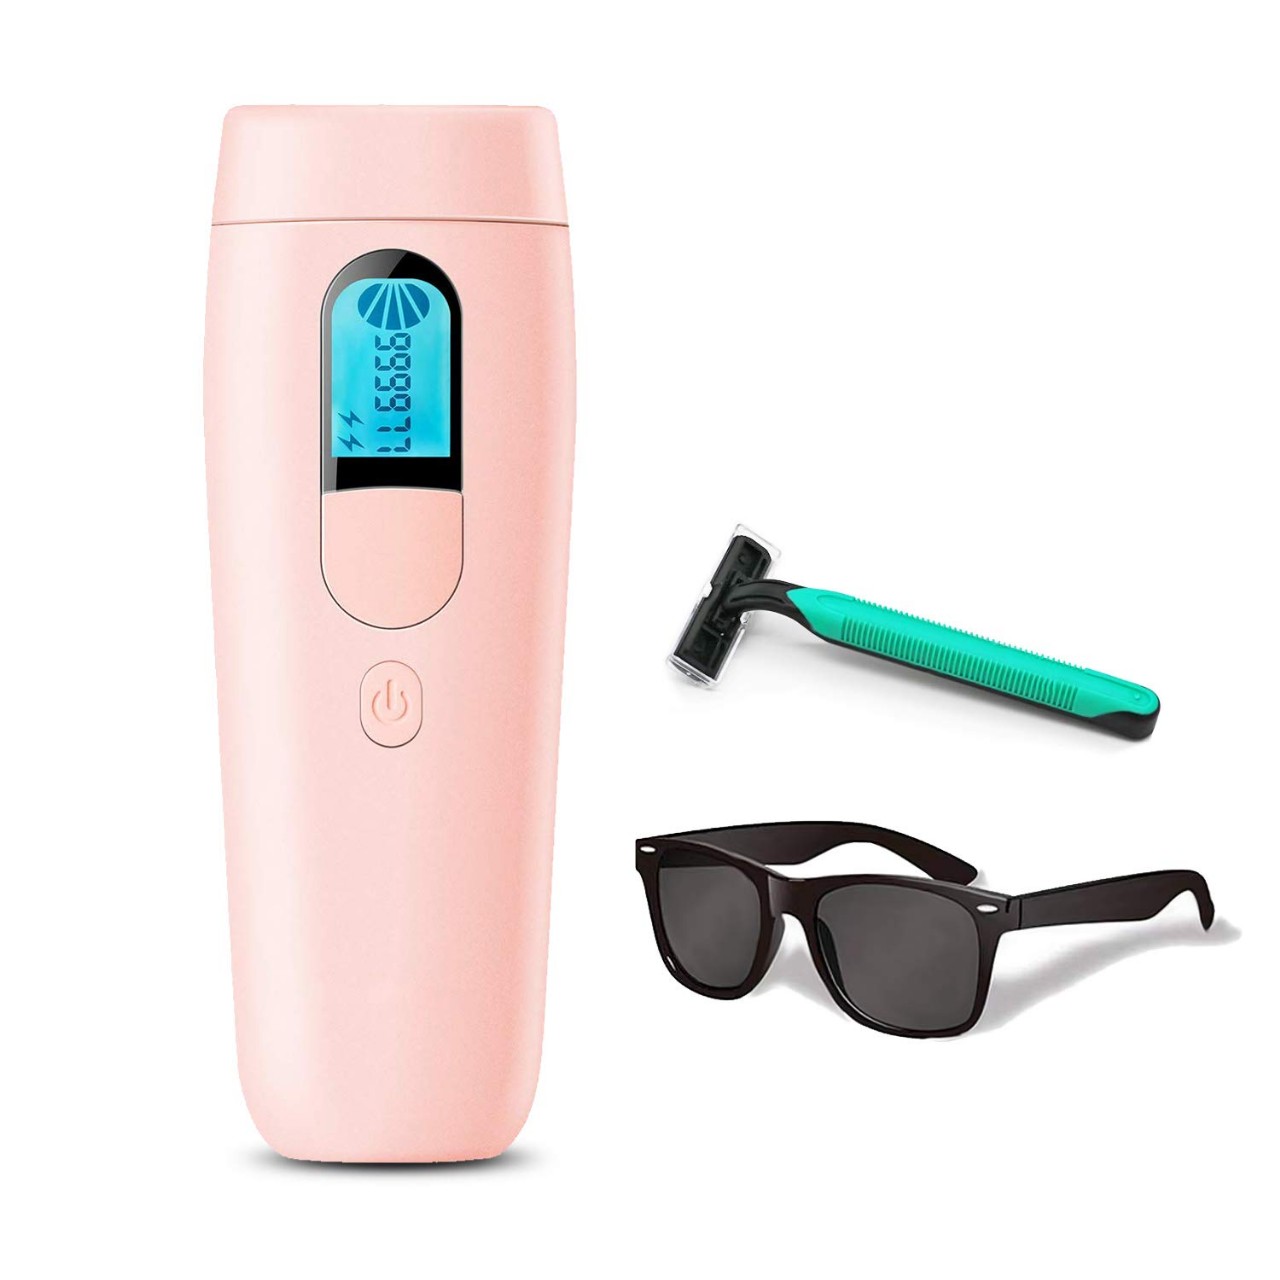 IPL Hair Removal System for Women Men,ZHT IPL Permanent Hair Removal,Professional Painless Facial